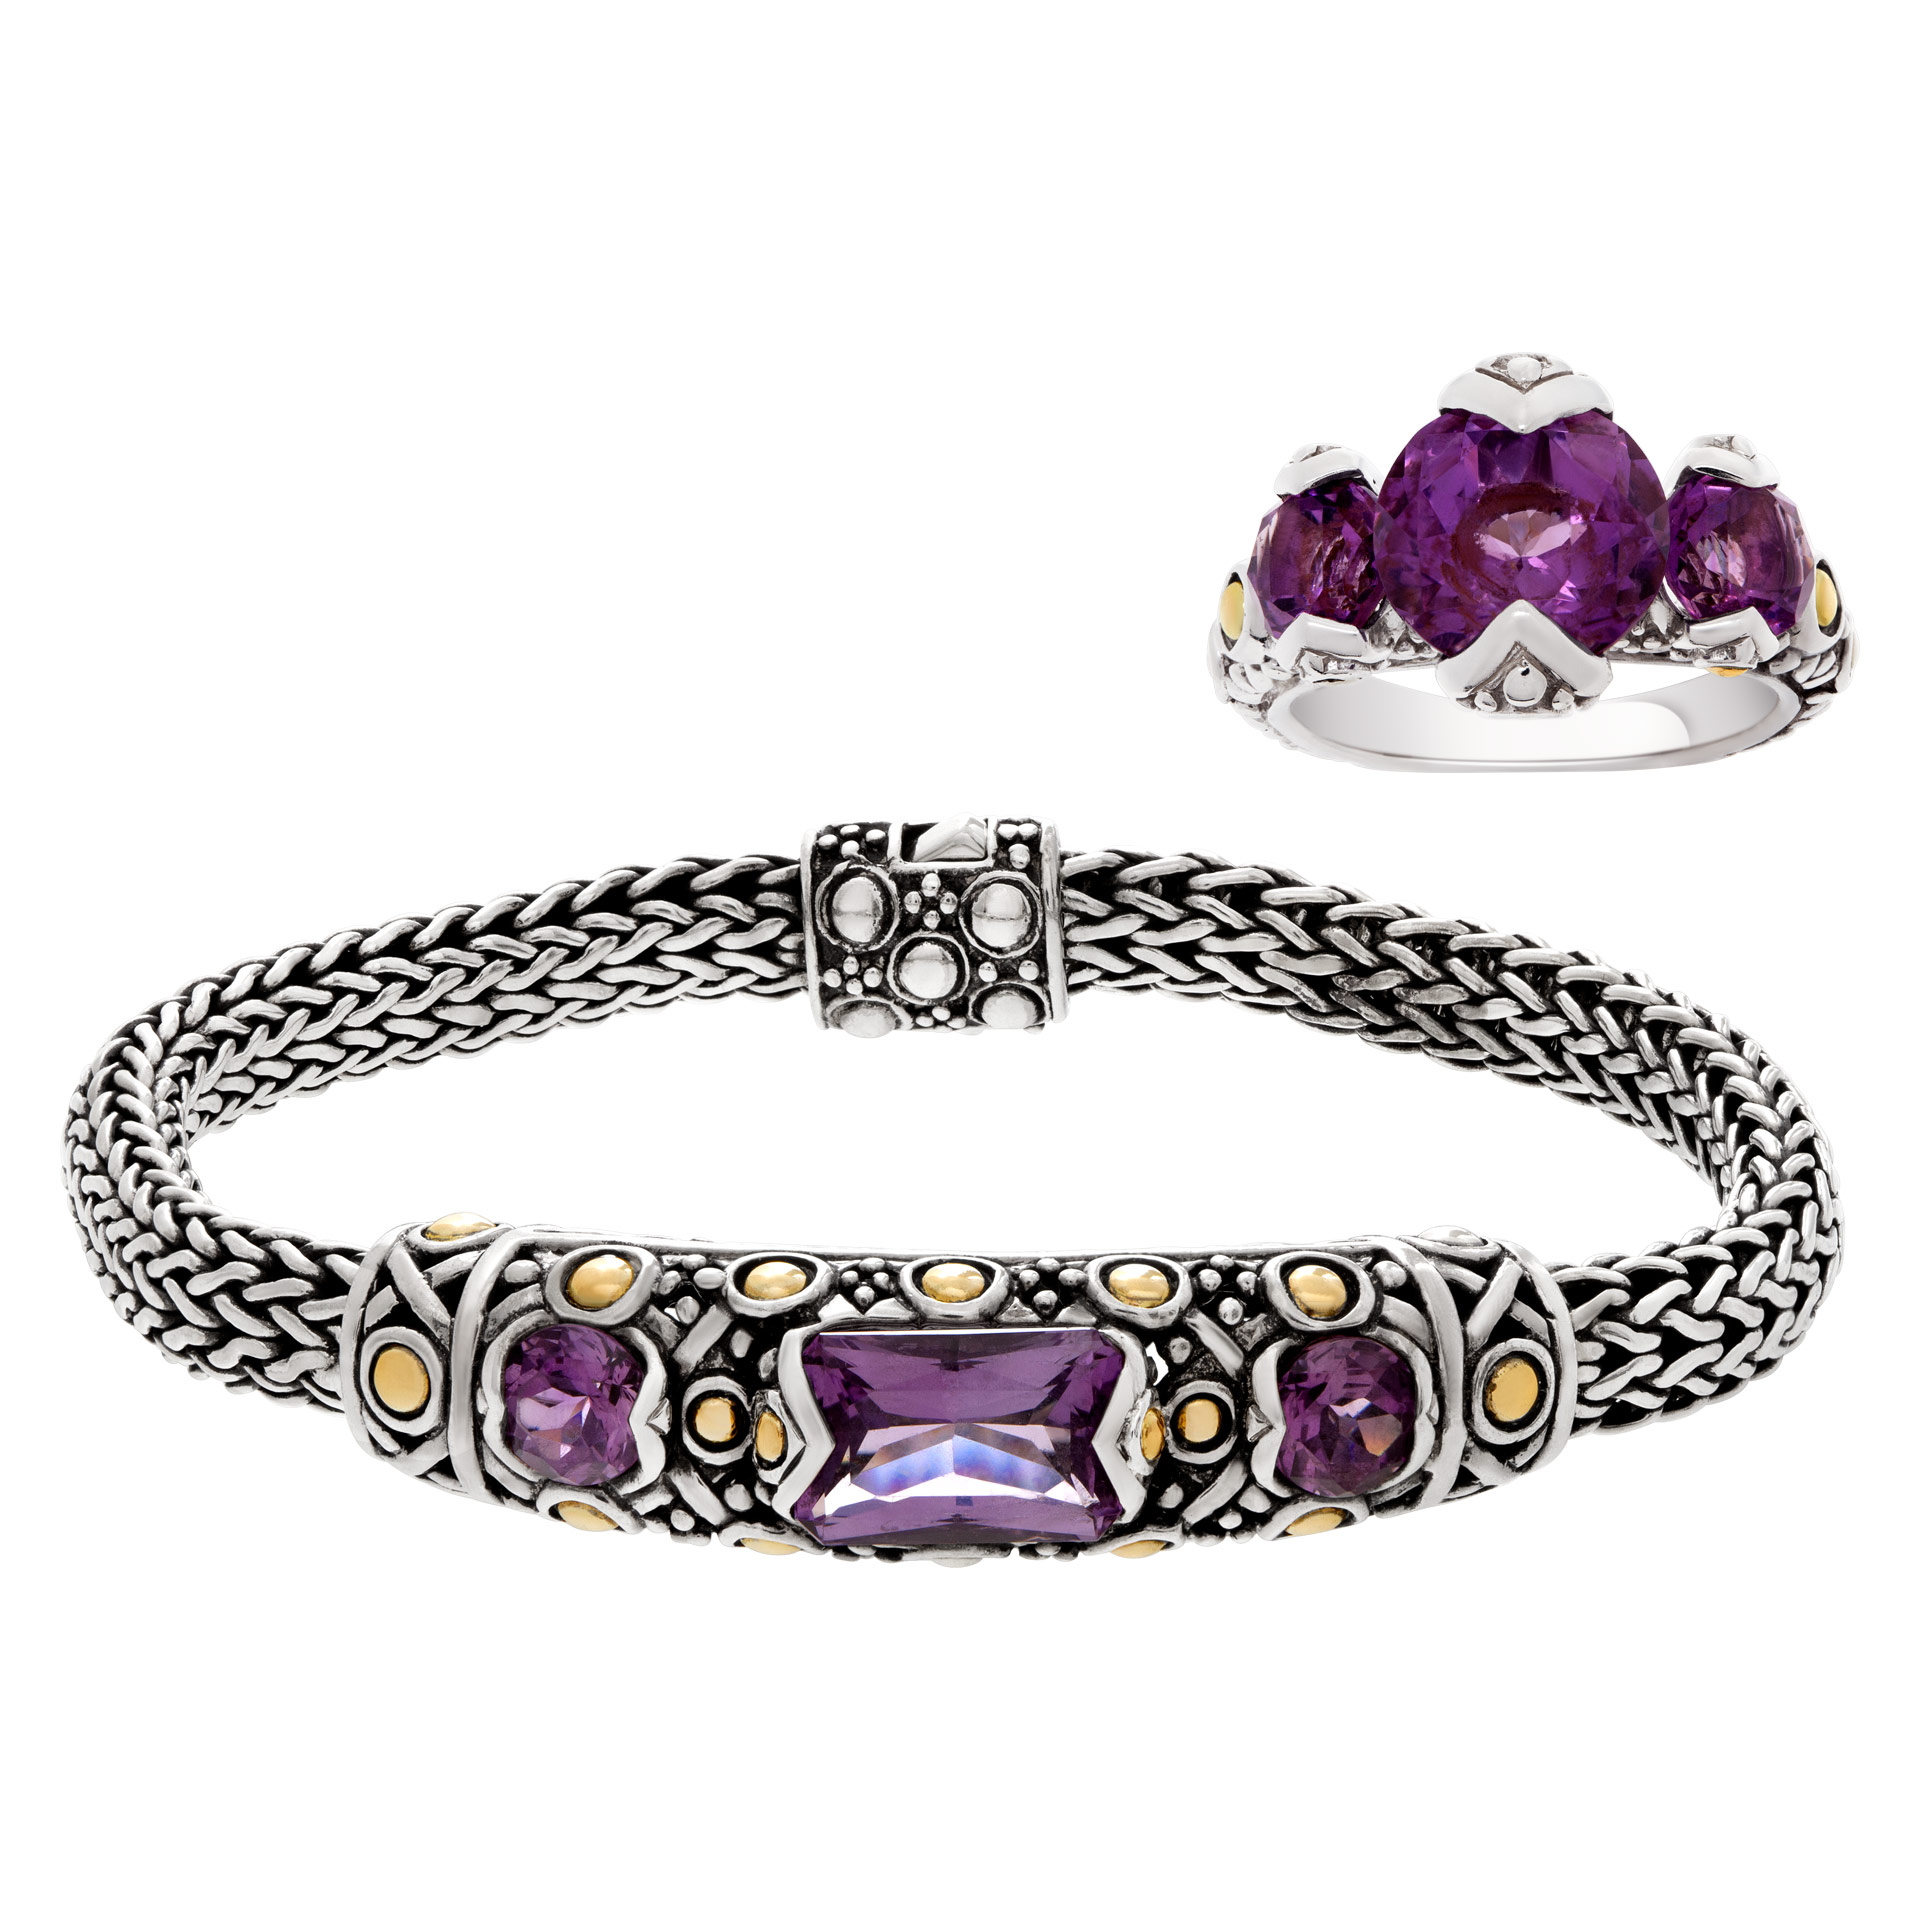 John Hardy bracelet and ring set with amethyst stones